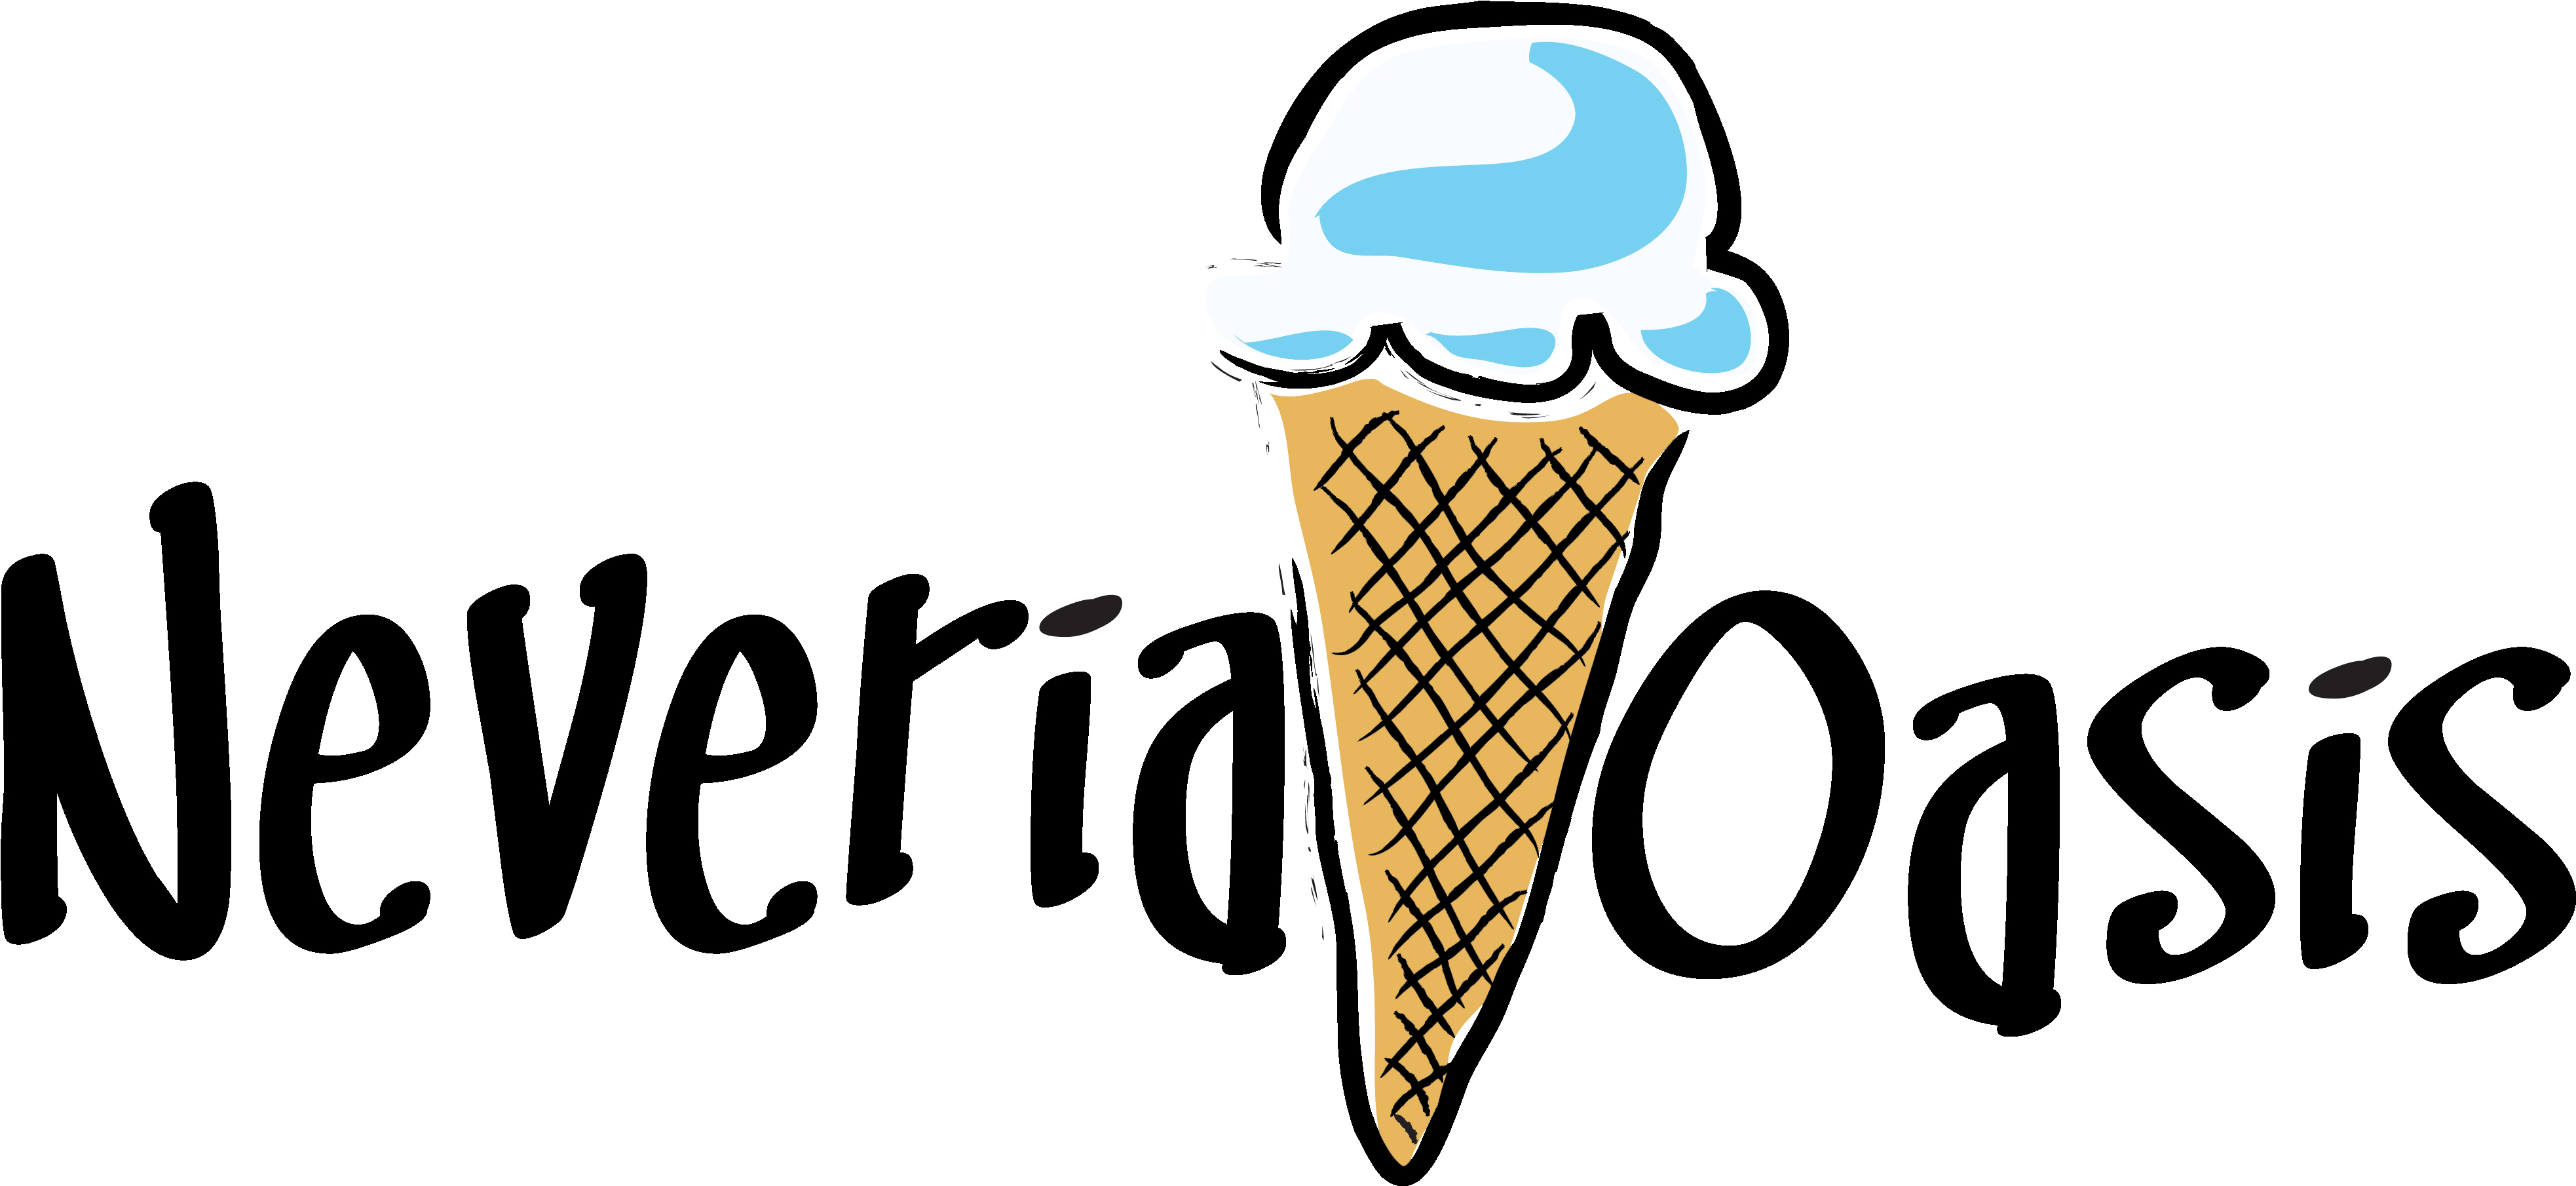 A Drawing Of An Ice Cream Cone